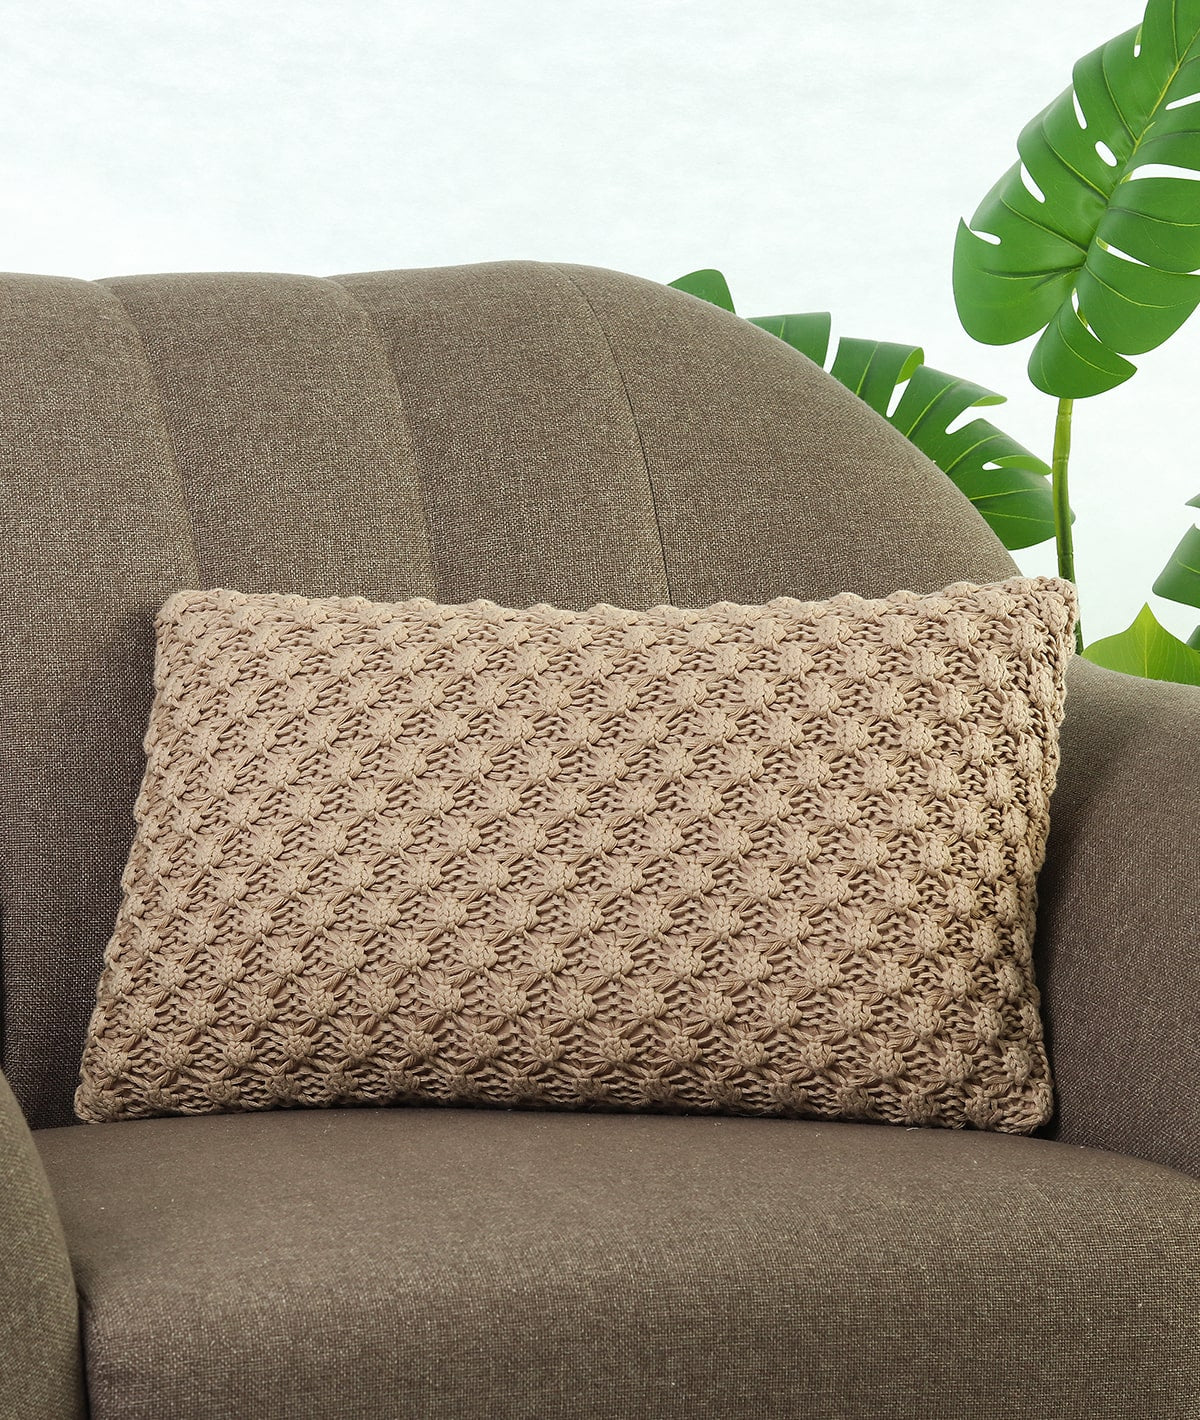 Popcorn Knit Light Beige Melange Cotton Knitted Decorative 12 X 20 Inches Cushion Cover